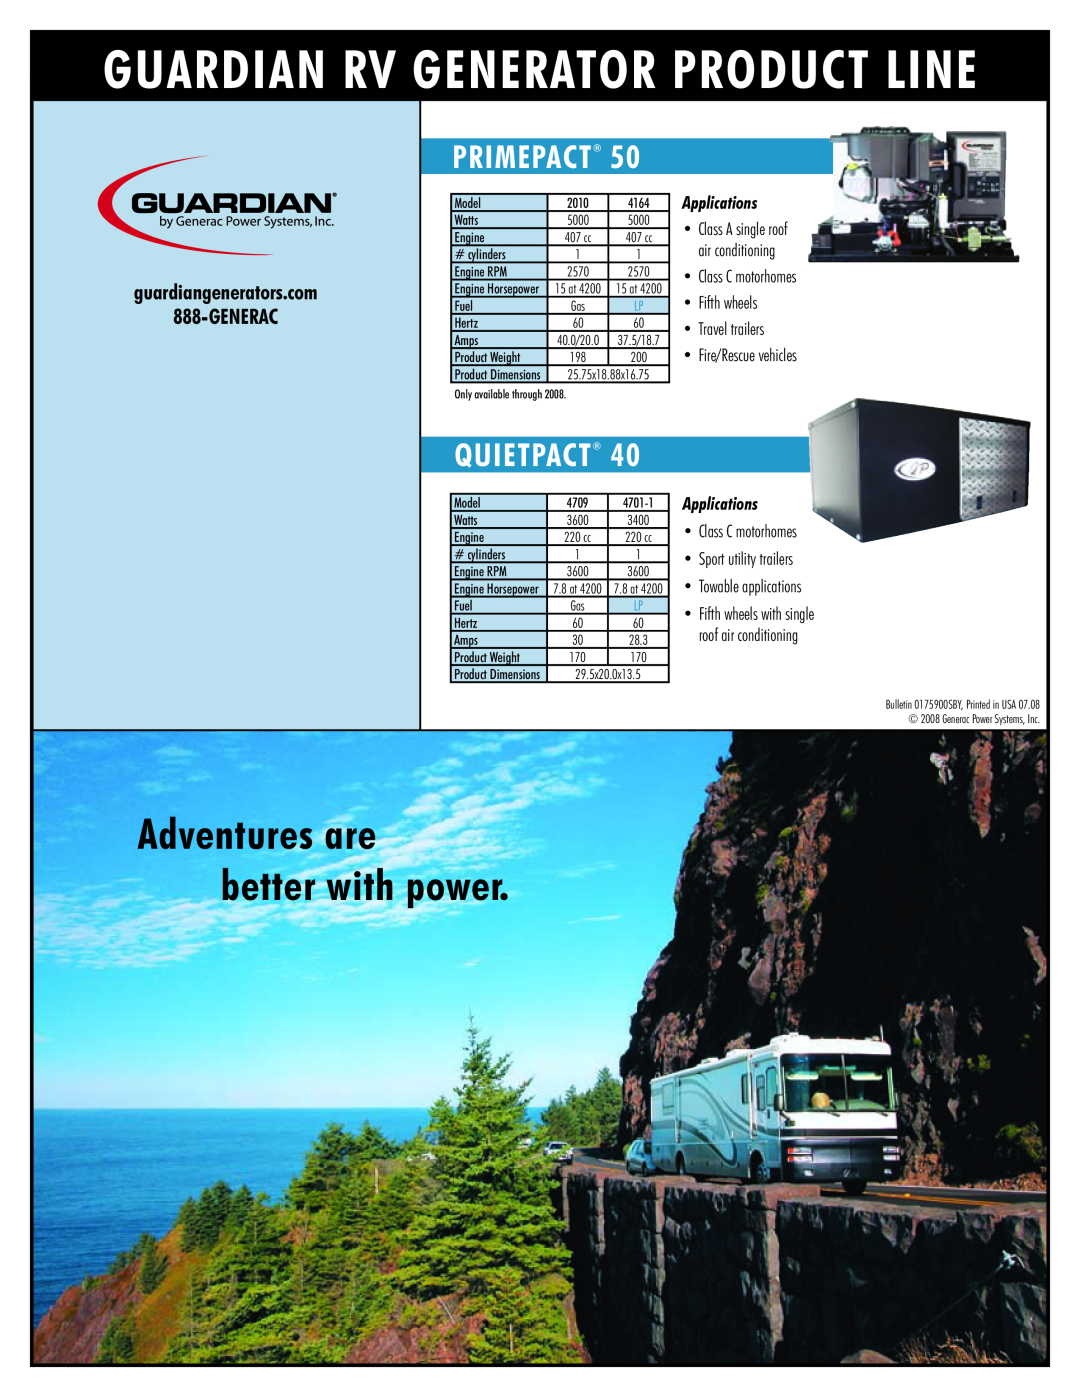 Generac Power Systems 4705 Primepact, Guardian RV Generator product line, Adventures are better with power, Quietpact 